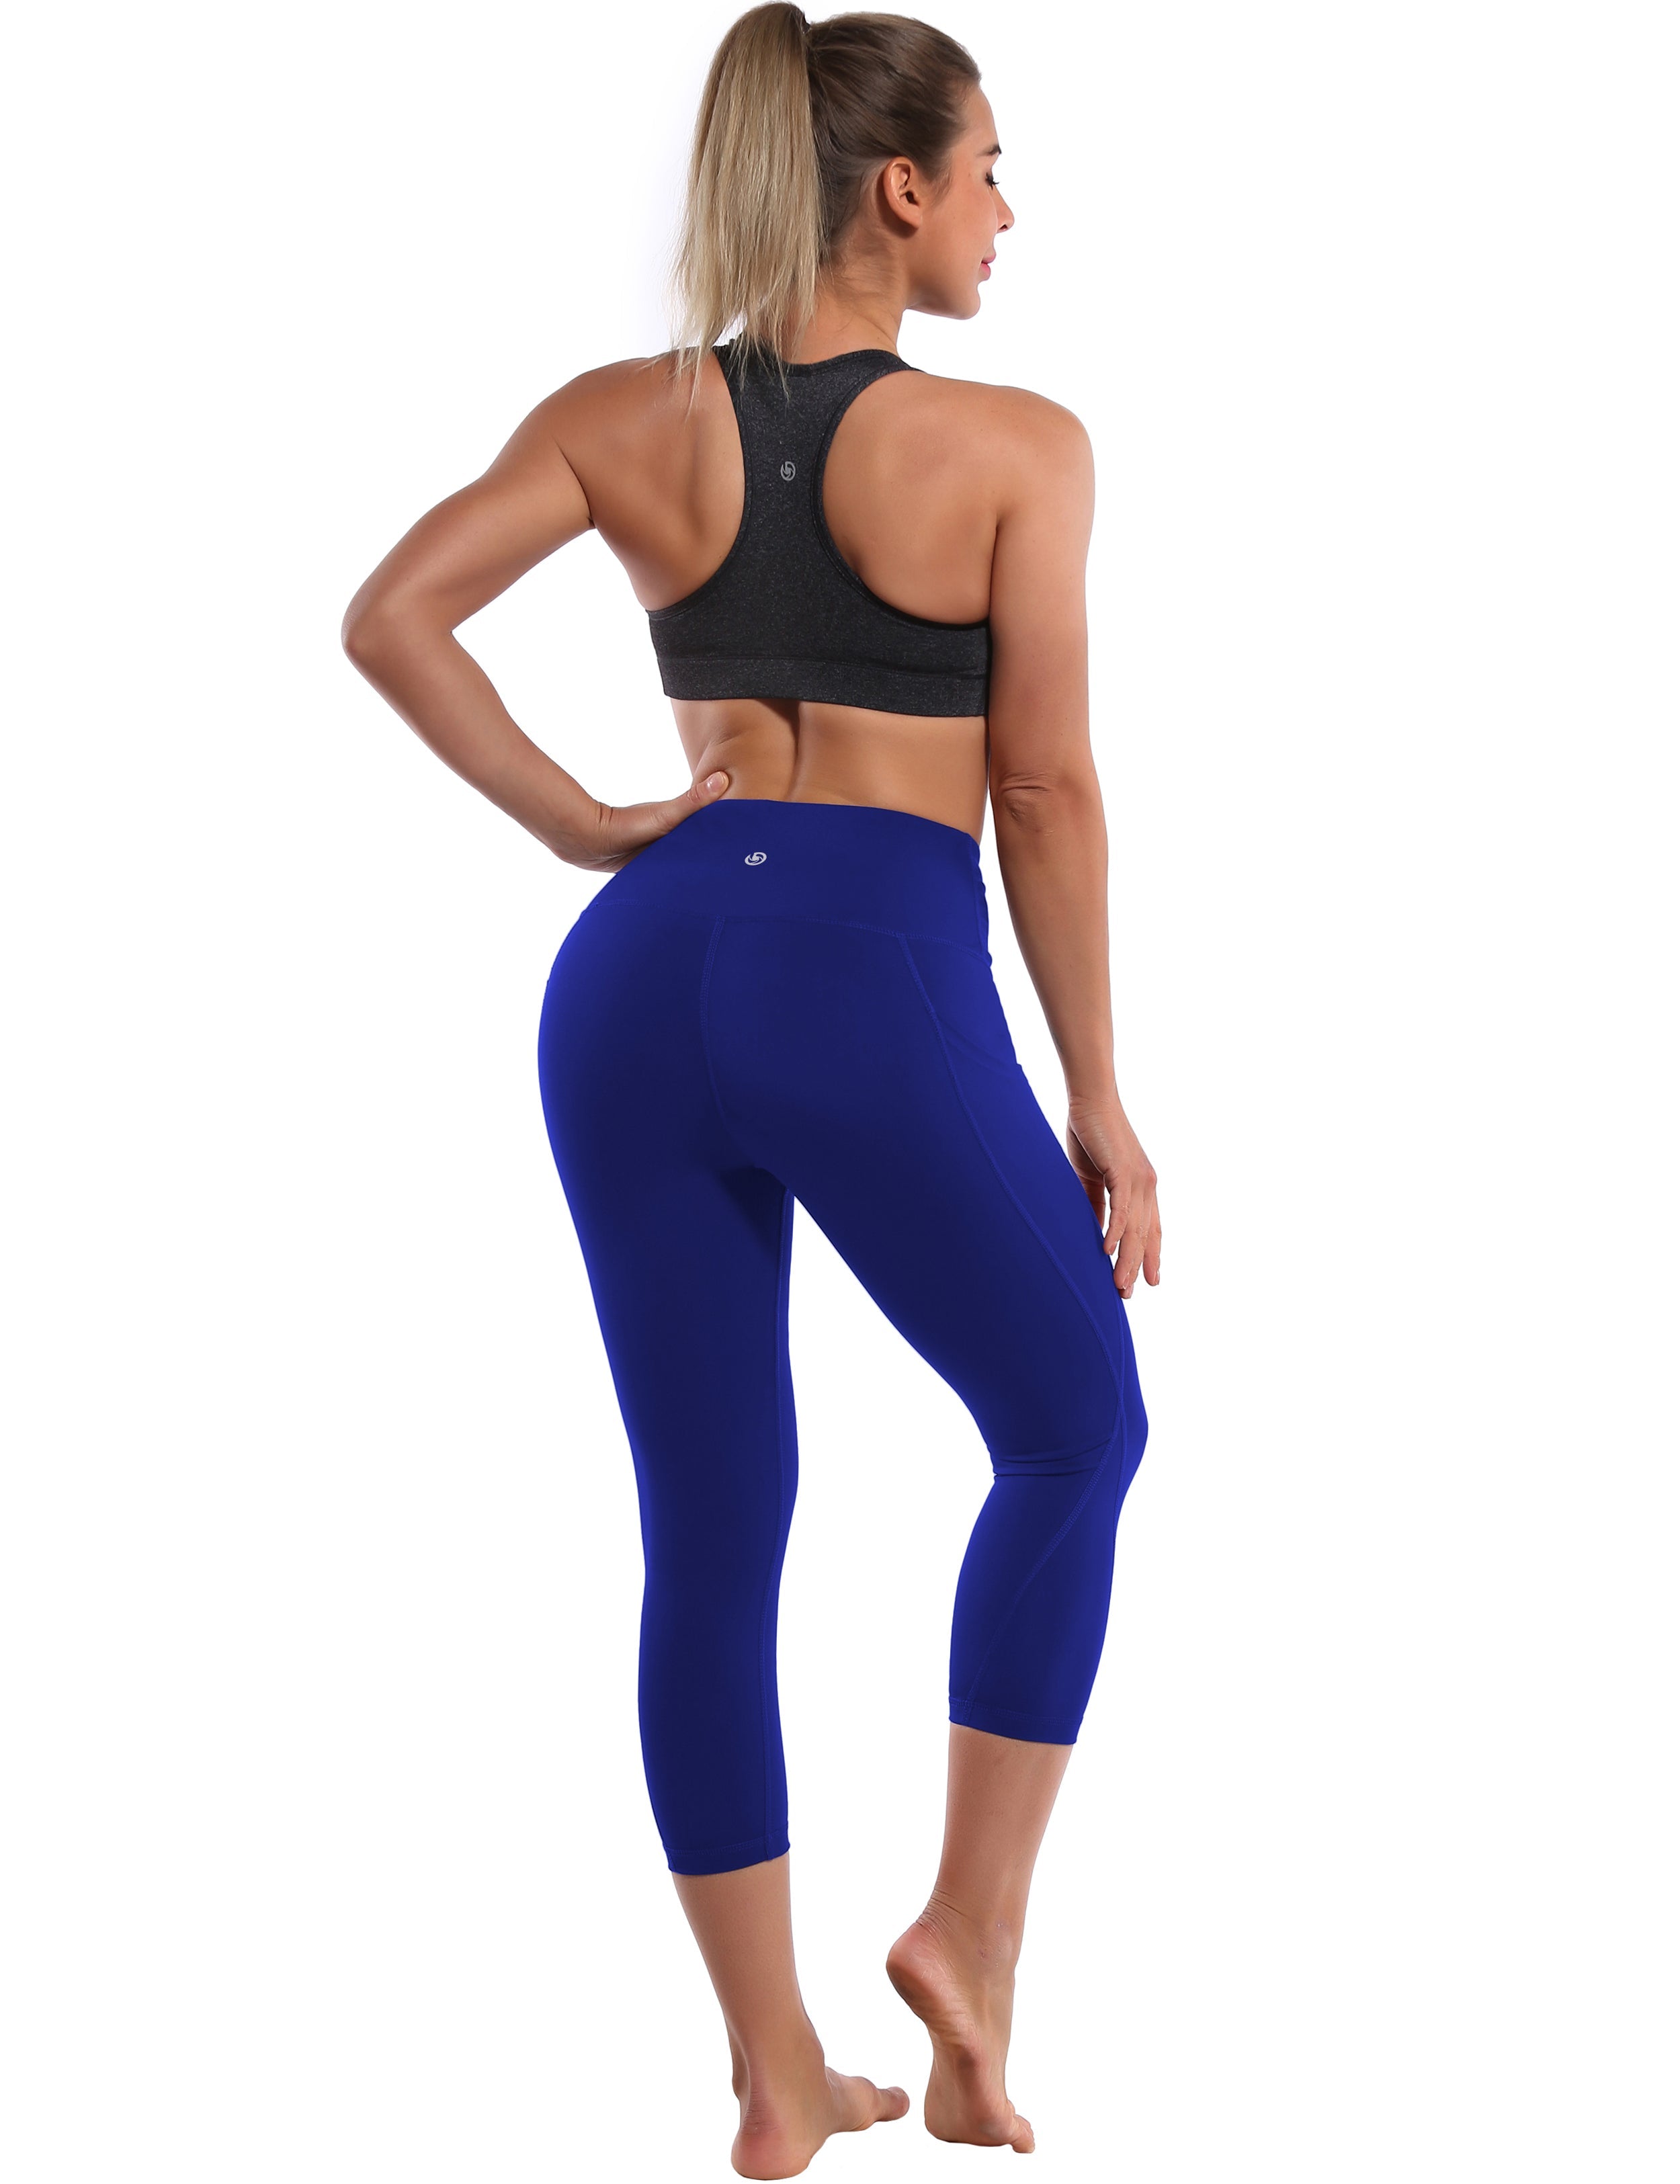 19" High Waist Side Pockets Capris navy 75%Nylon/25%Spandex Fabric doesn't attract lint easily 4-way stretch No see-through Moisture-wicking Tummy control Inner pocket